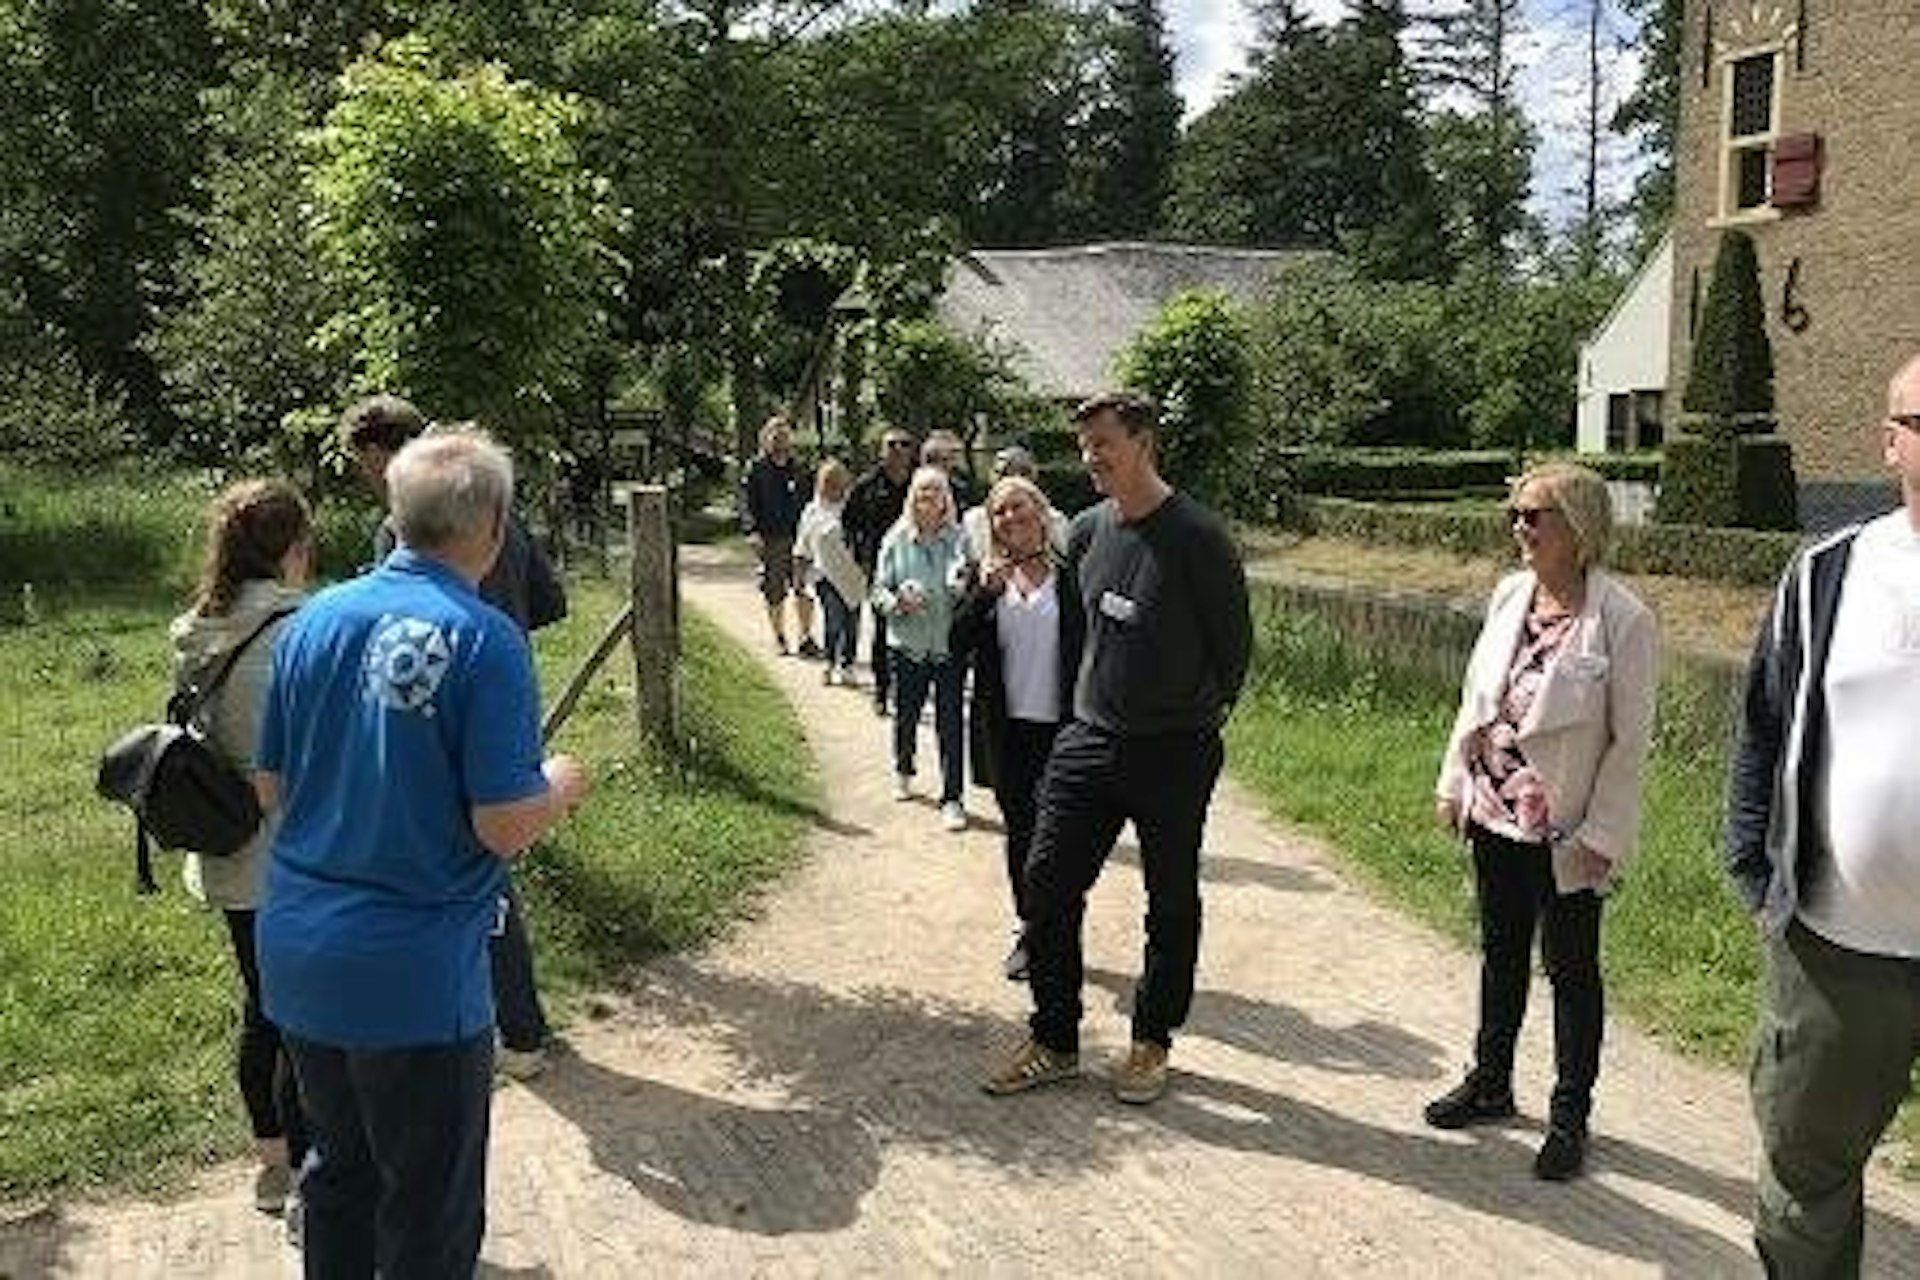 Tour at the Dutch Open Air Museum